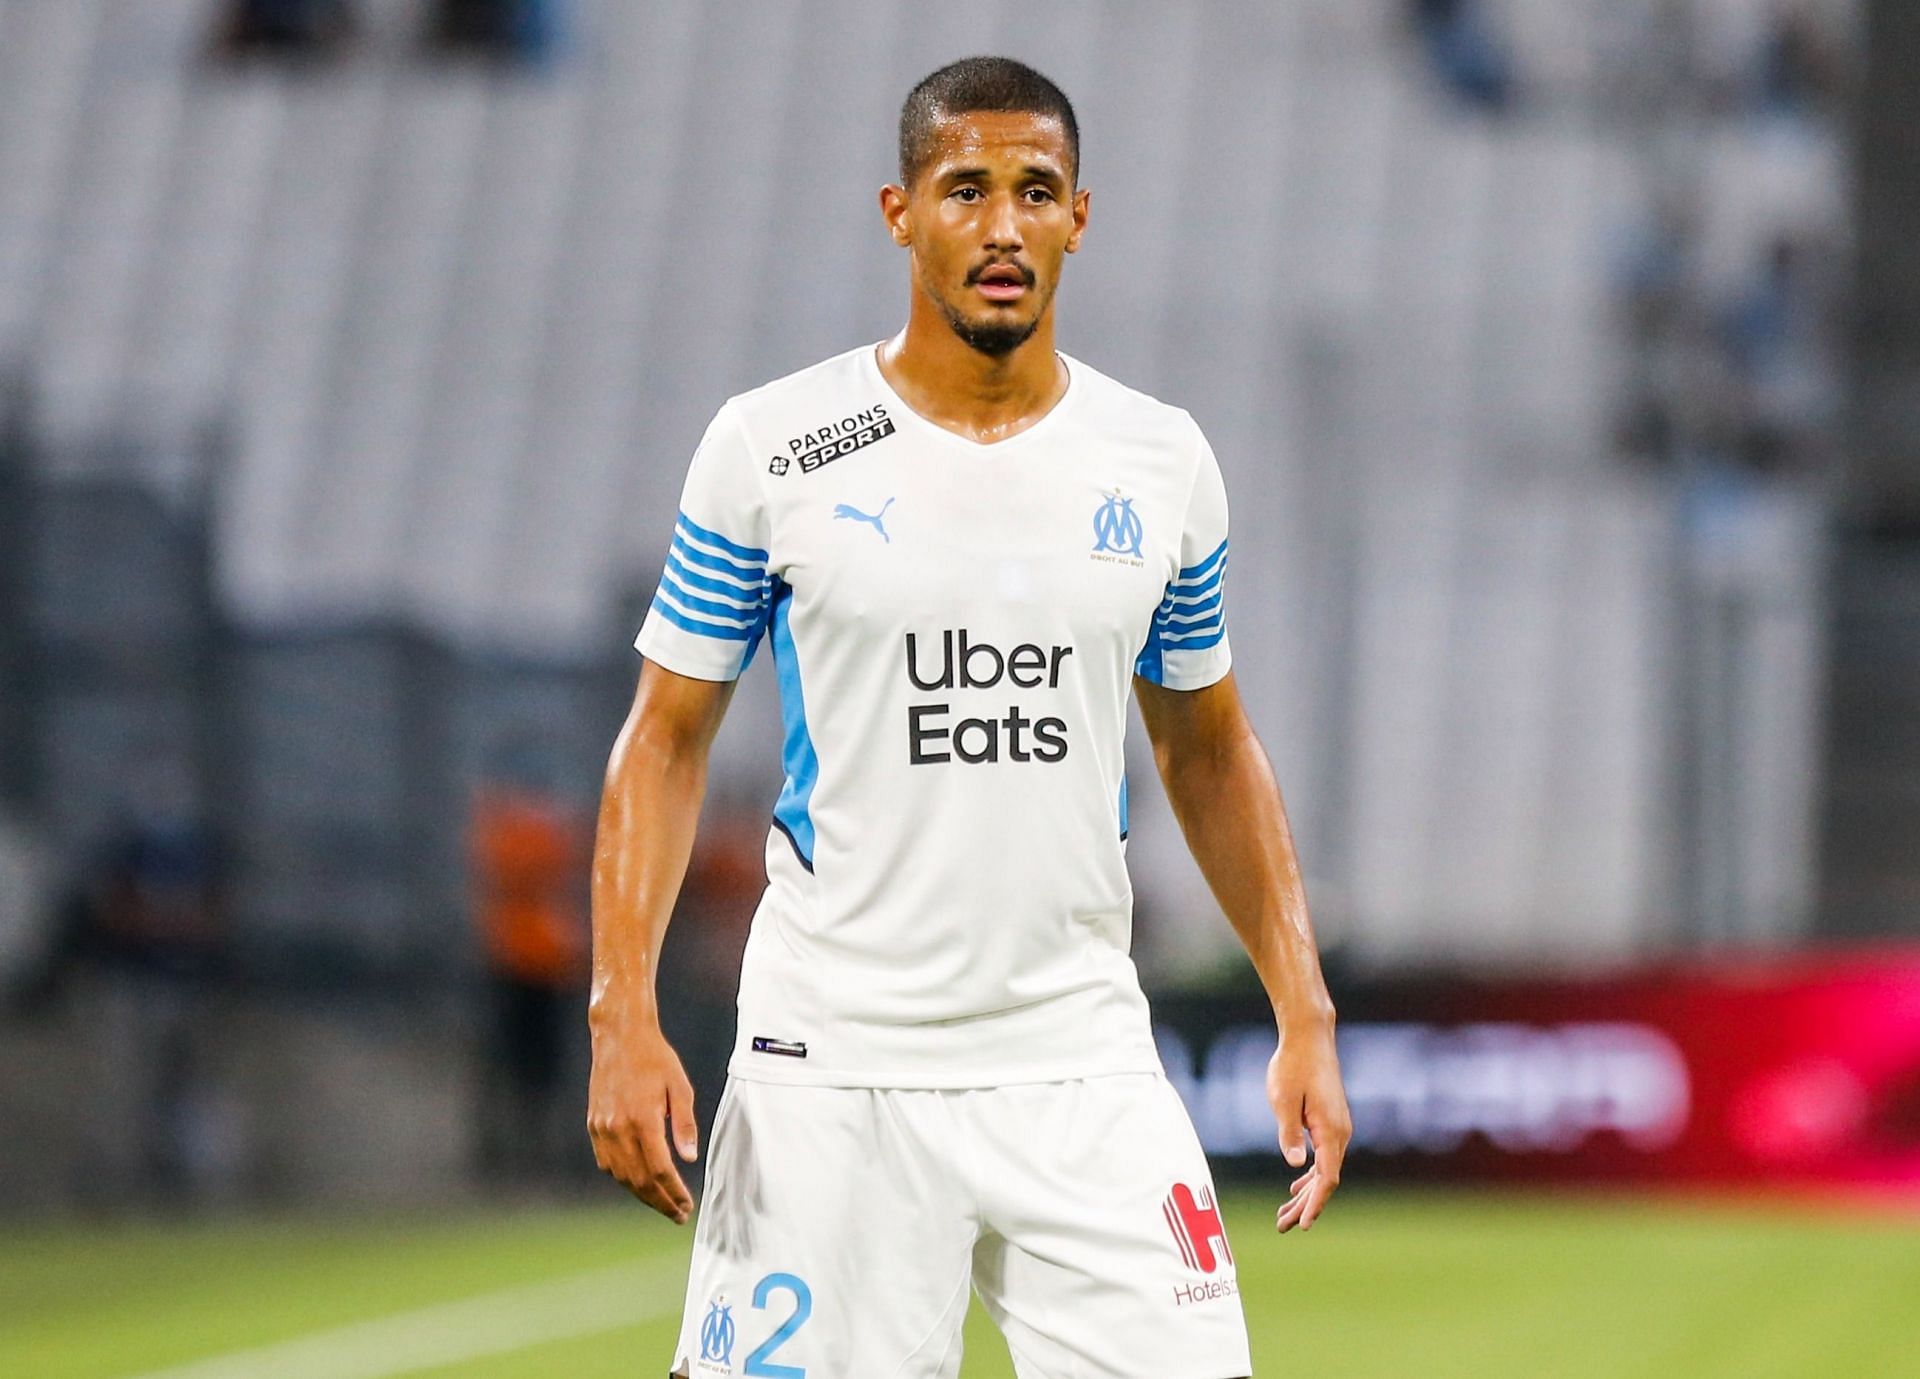 Saliba is steadily going up the ranks at Marseille.